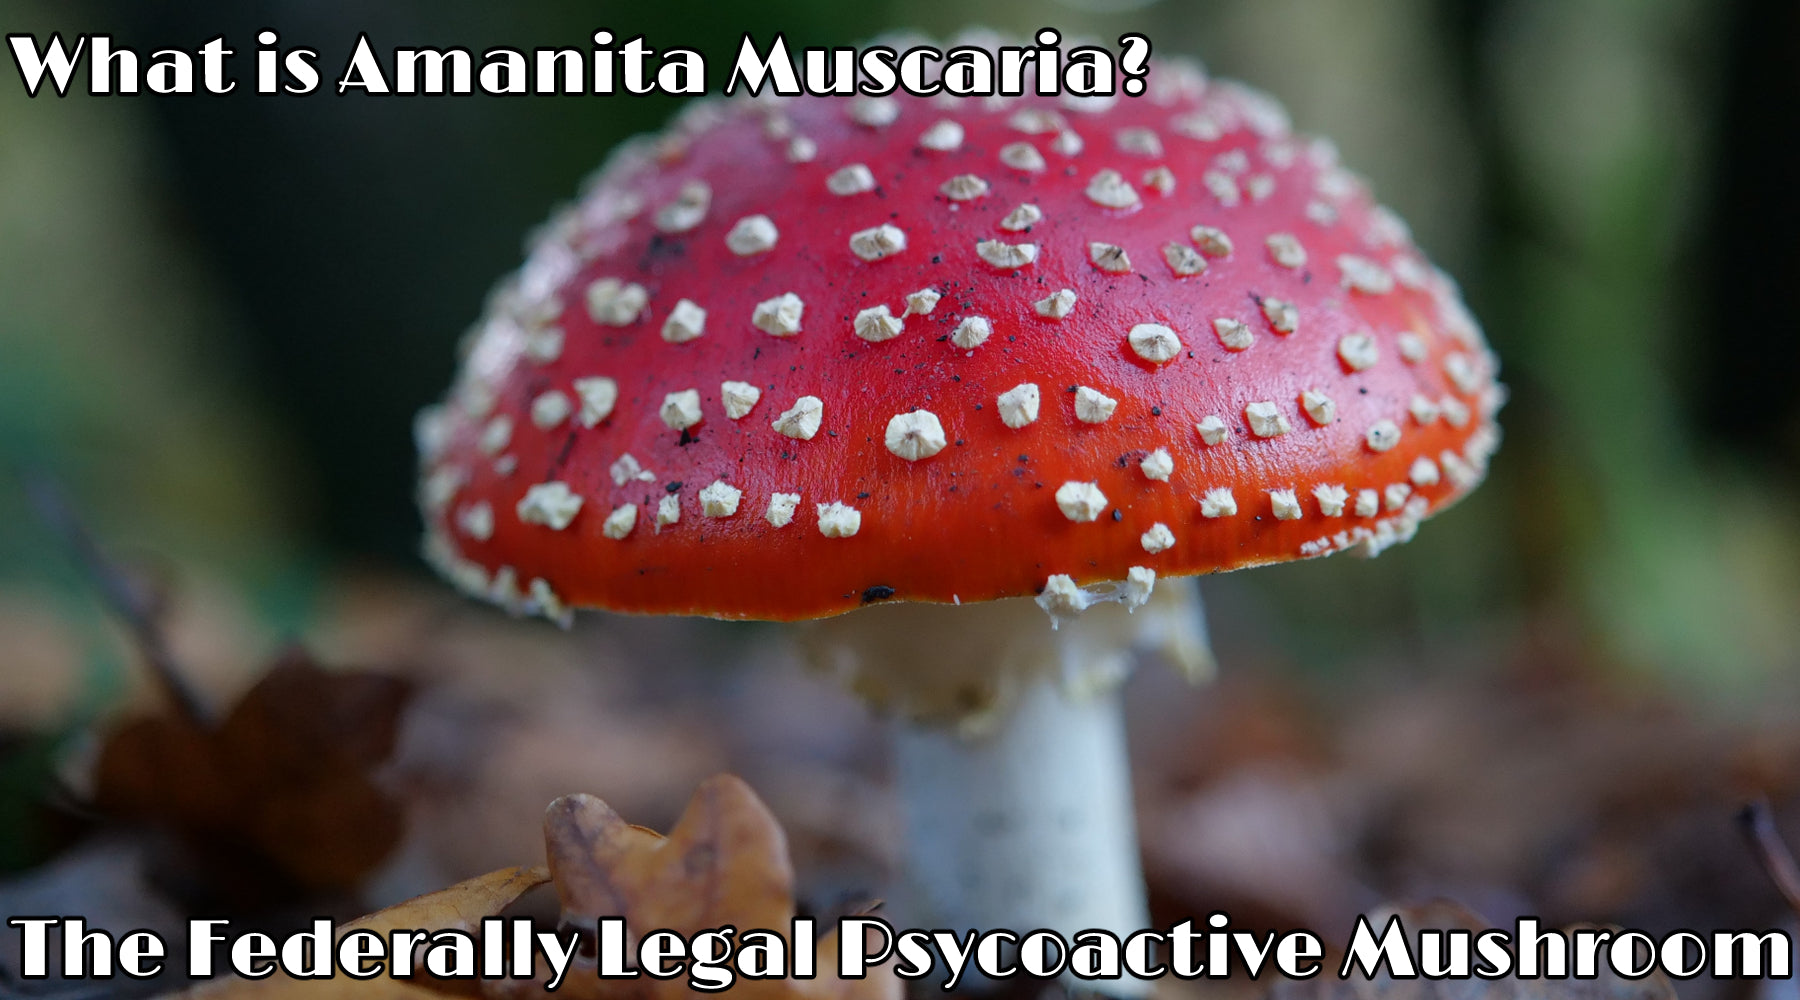 What is Amanita Muscaria? The Federally Legal Psychoactive Mushroom